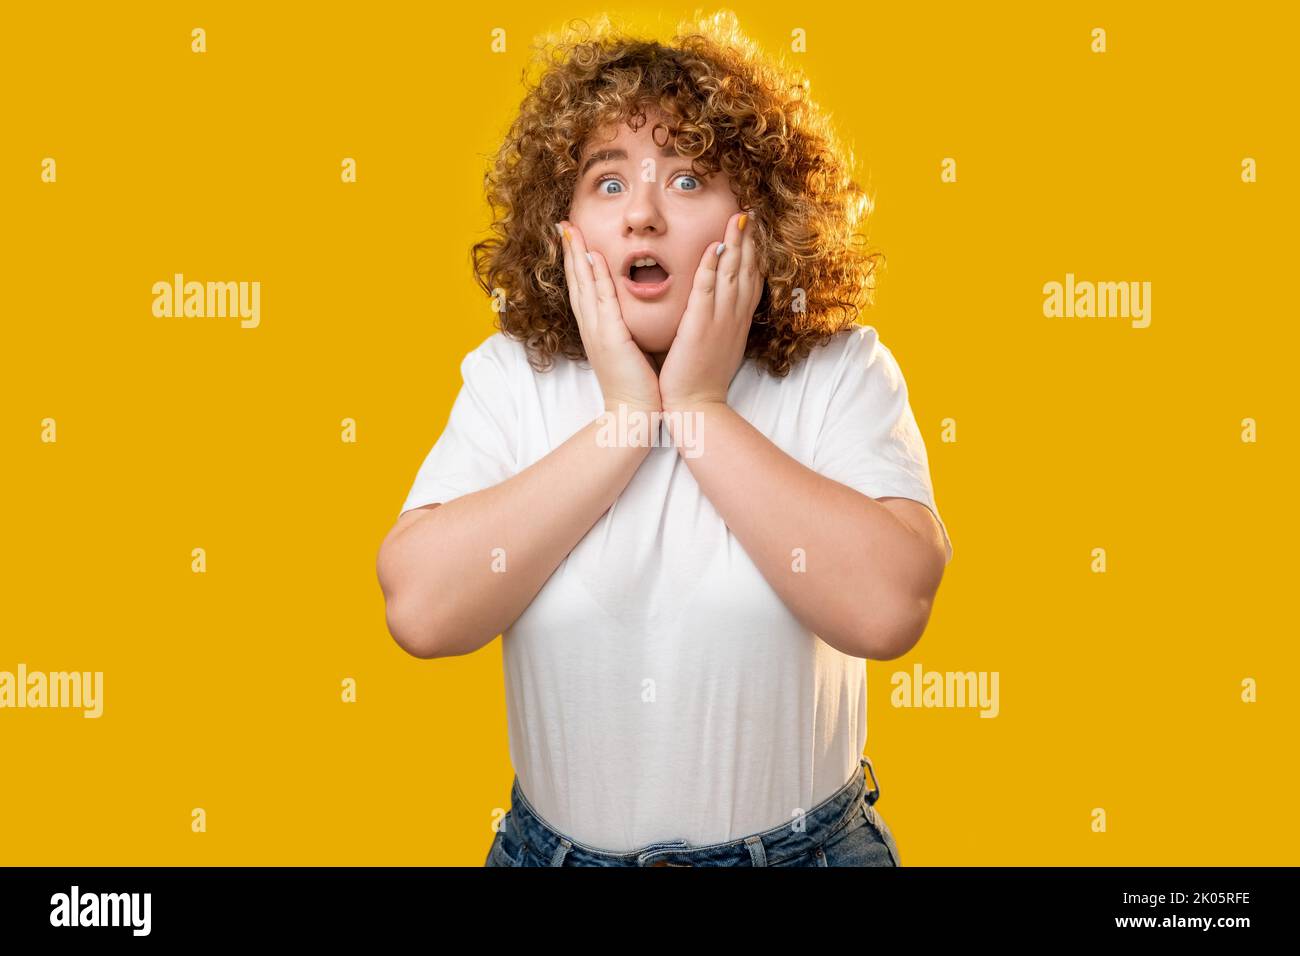 omg face shocked woman obesity overweight girl Stock Photo